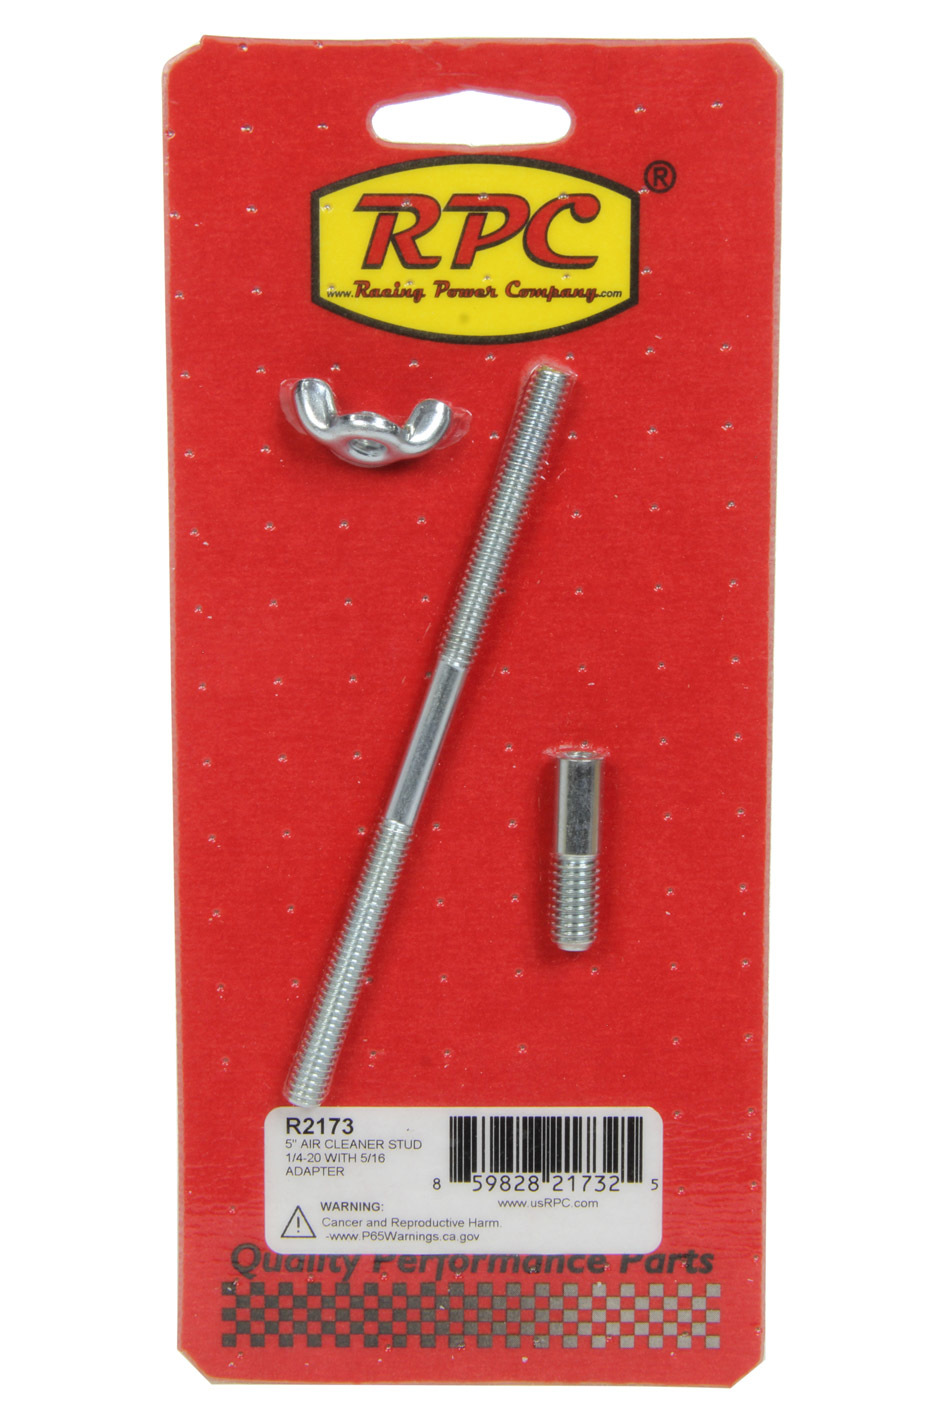 Racing Power Company R2173 Air Cleaner Stud, 1/4-20 in Thread, 5 in Long, 5/16-18 in Adapter, Steel, Zinc Oxide, Each